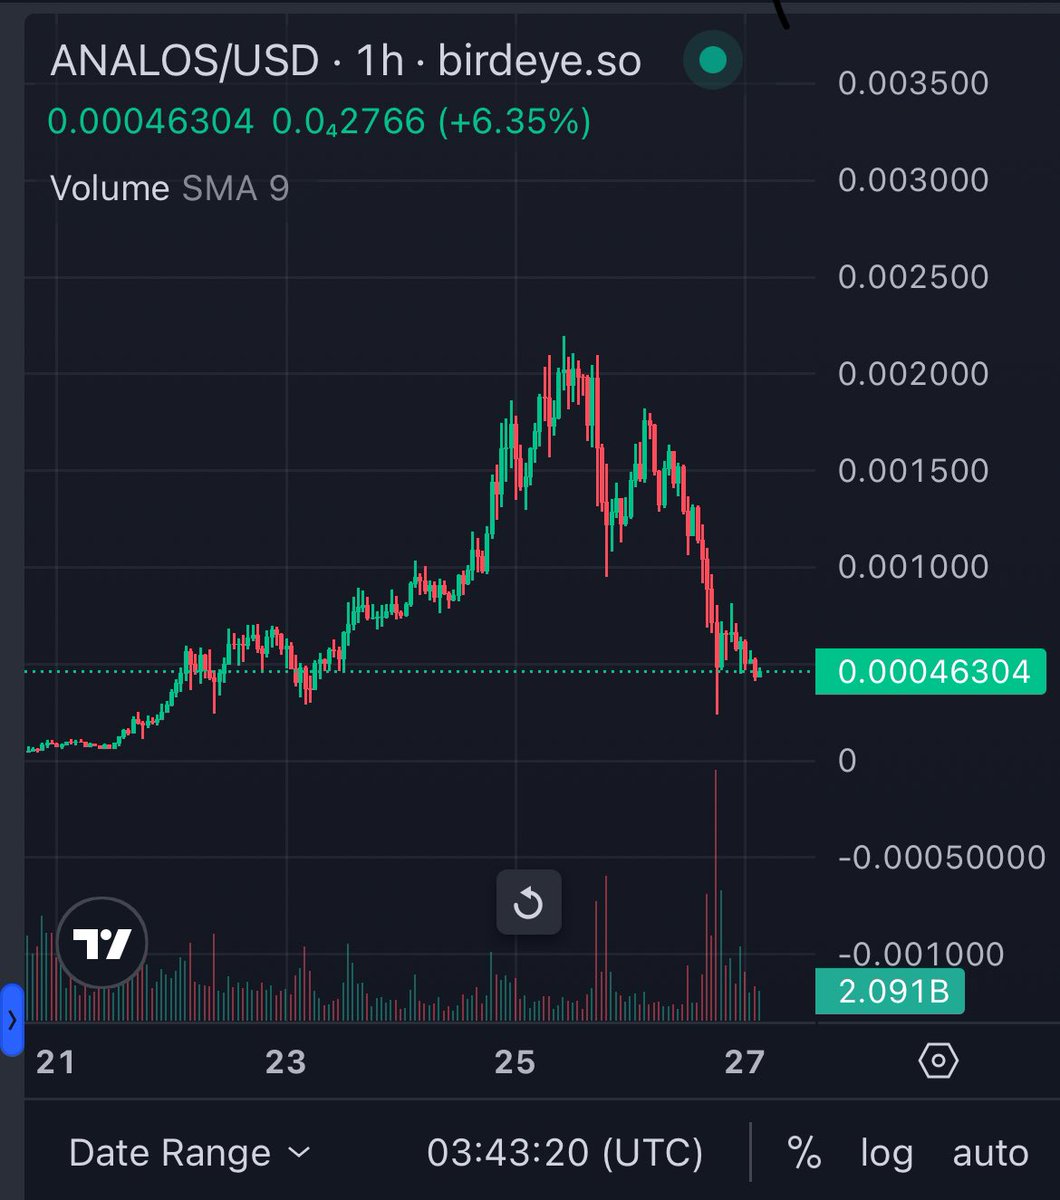 Something fishy abt $ANALOS. No talk about it on OG sol Twitter > Shilled 5x a day by @ardizor @nobrainflip and a few others > Somehow gets listed on KuCoin? > Dumps 75% right after, despite flying past 100m+ mcap > Some fund or MMs just made racks off this, ig props 🤷‍♂️ If